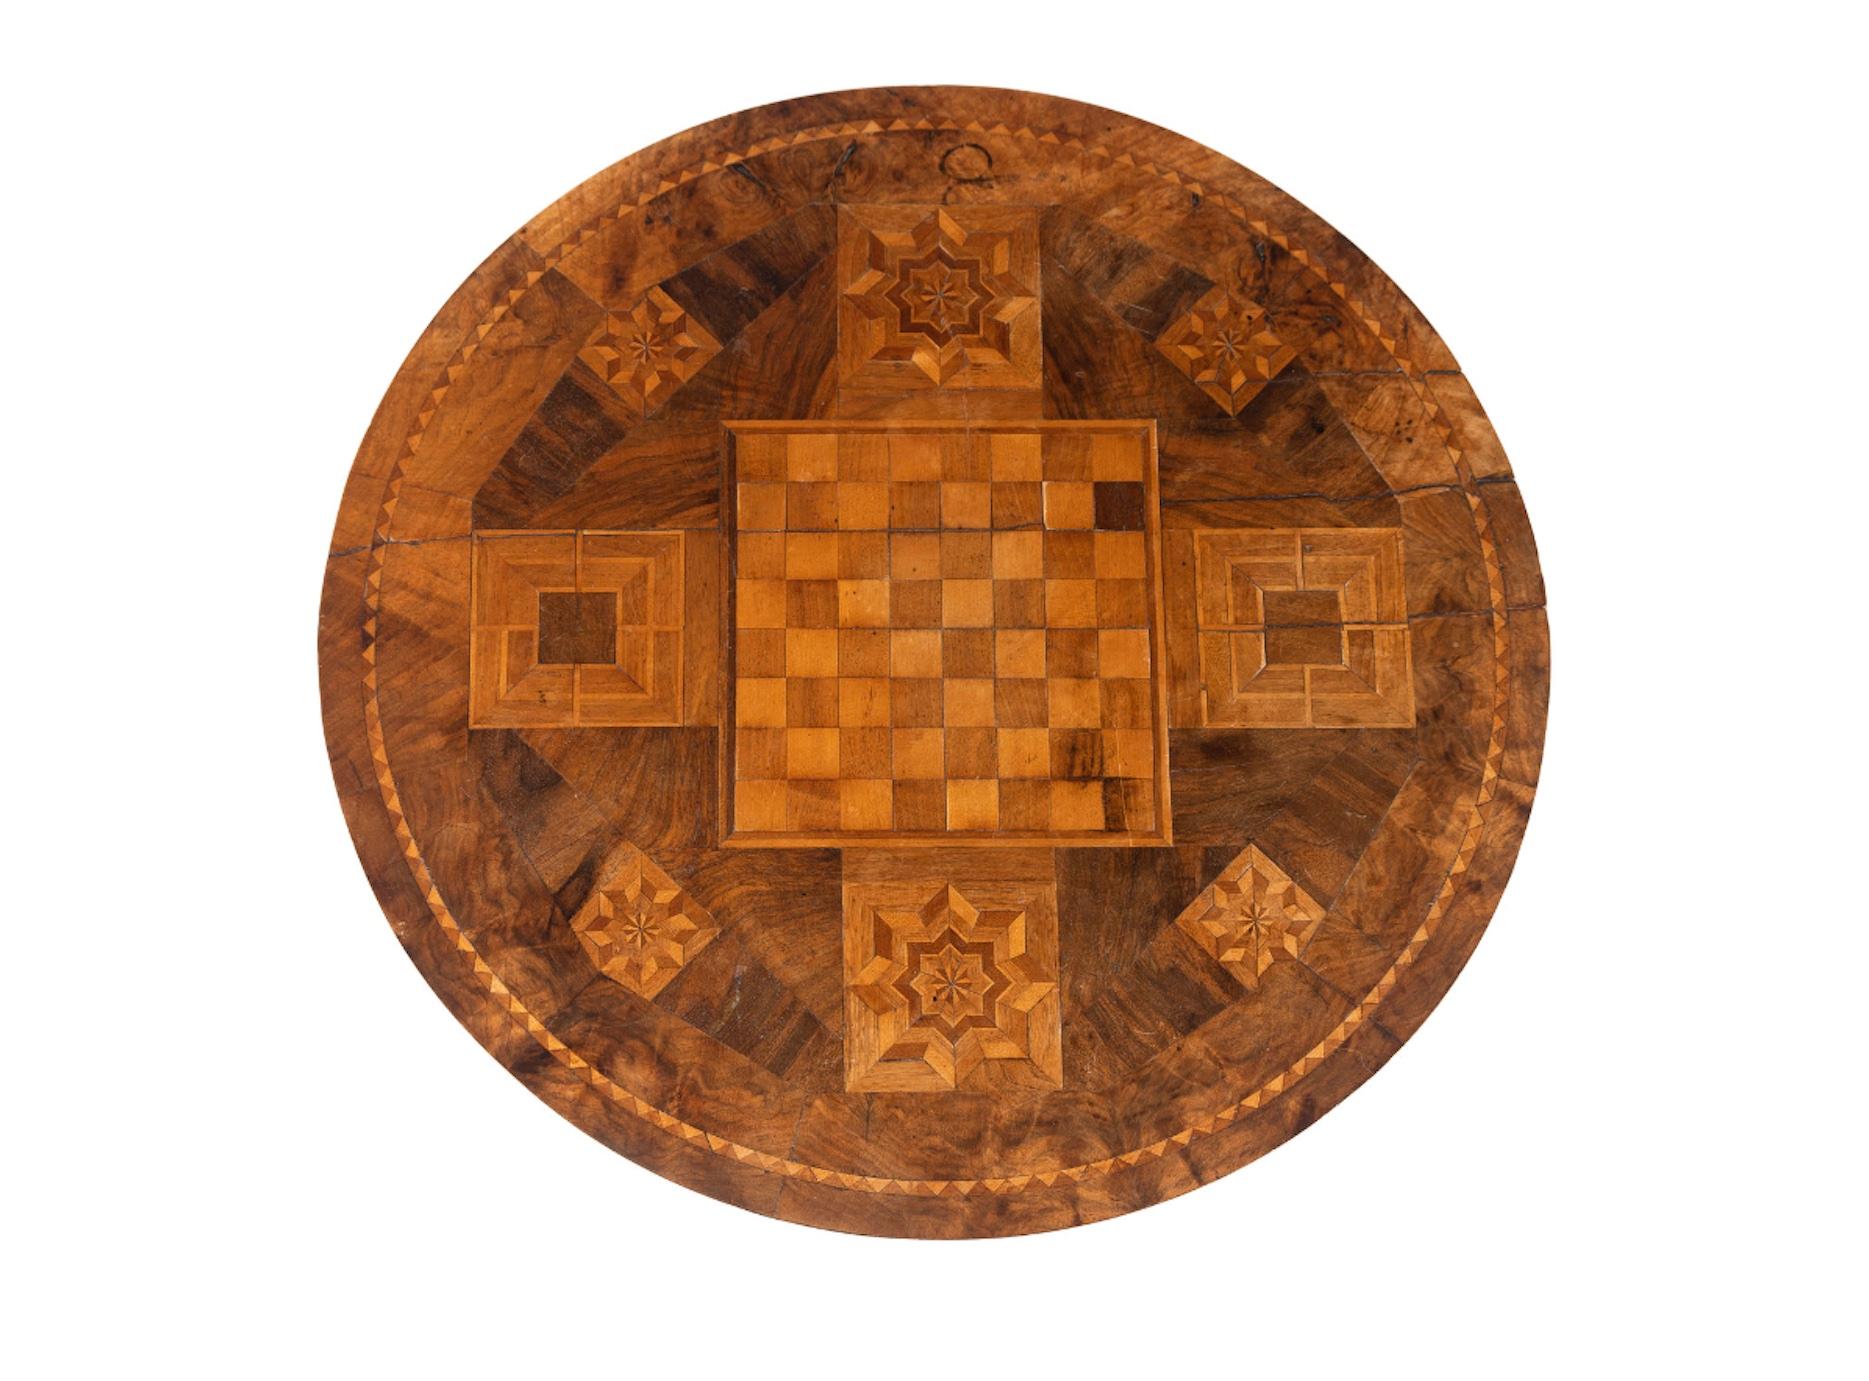 A Victorian Marquetry Game Table, Gaming Set and Treen Box
19th Century
Height 28 3/4 x diameter 24 1/4 inches.
Great color and patination.
Property from the Estate of Ruthann 